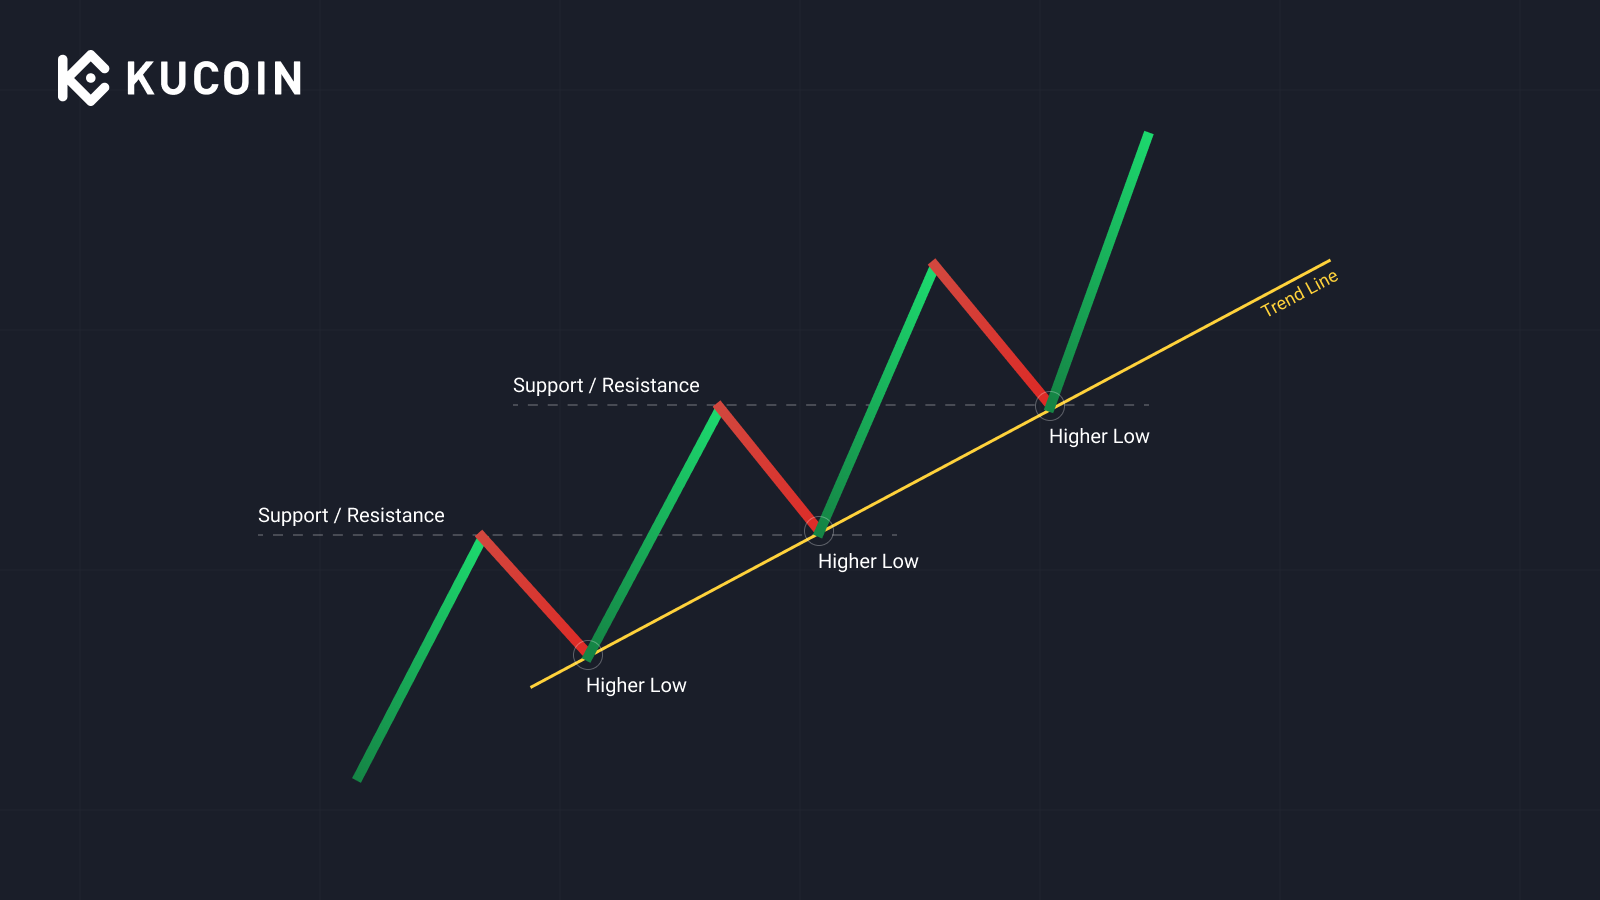 Drawing a Trend Line